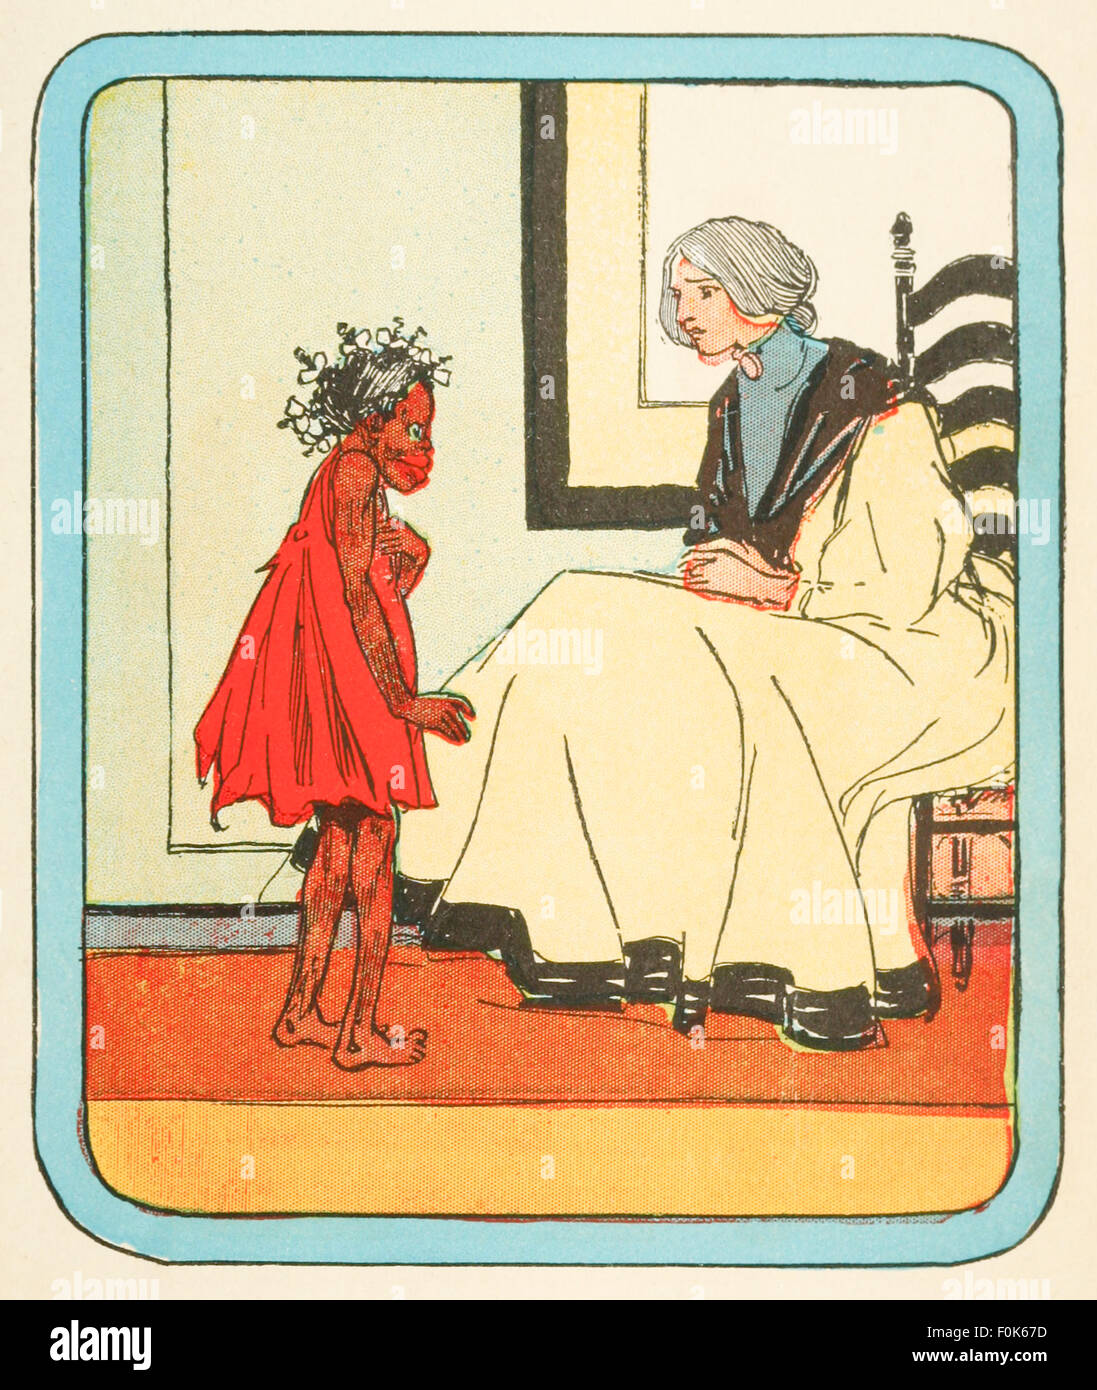 'Augustine, what in the world did you bring her here for?' protested Miss Ophelia, when Topsy is bought back from the market. Image from 'The Story of Topsy from Uncle Tom's Cabin' illustrated by John R. Neill (1877-1943). See description for more information. Stock Photo